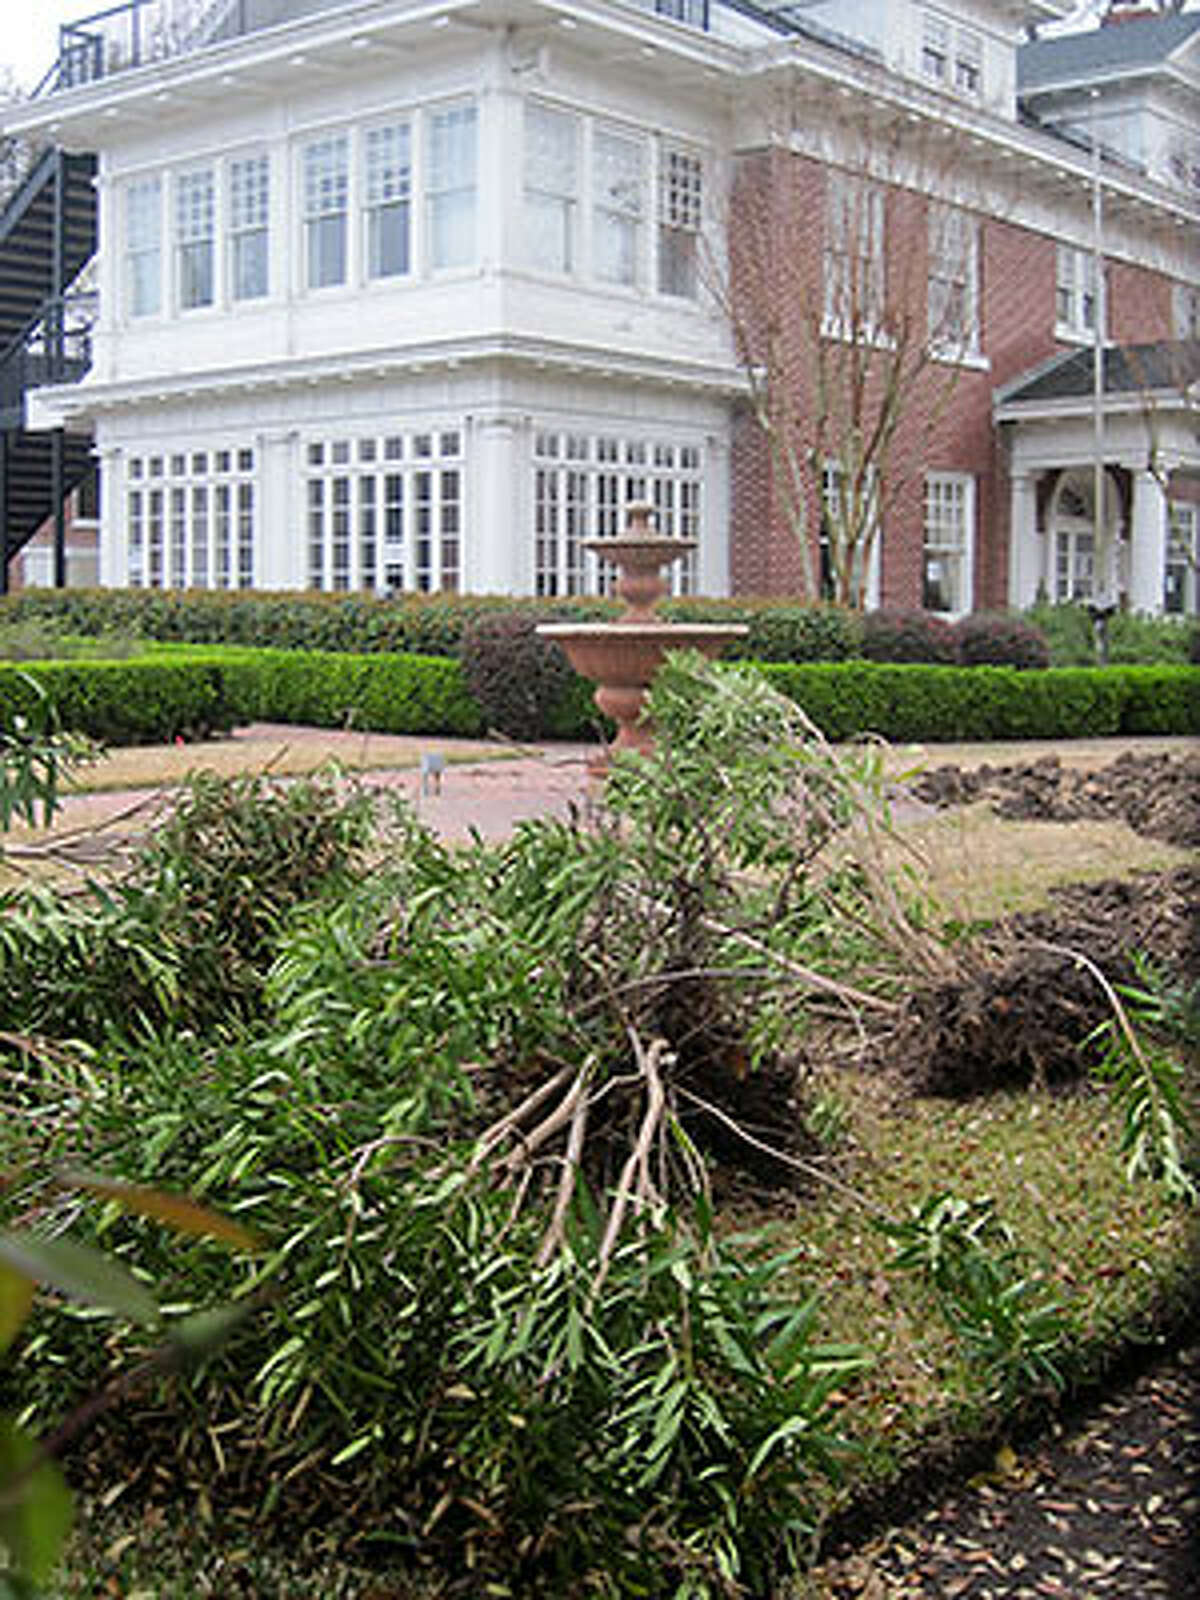 Bullock-City federation mansion is known as the first house in Houston to be fitted with Central A/C.  Construction workers moved in to remove interior fittings after a demolition permit was filed Feb 14th 2014.